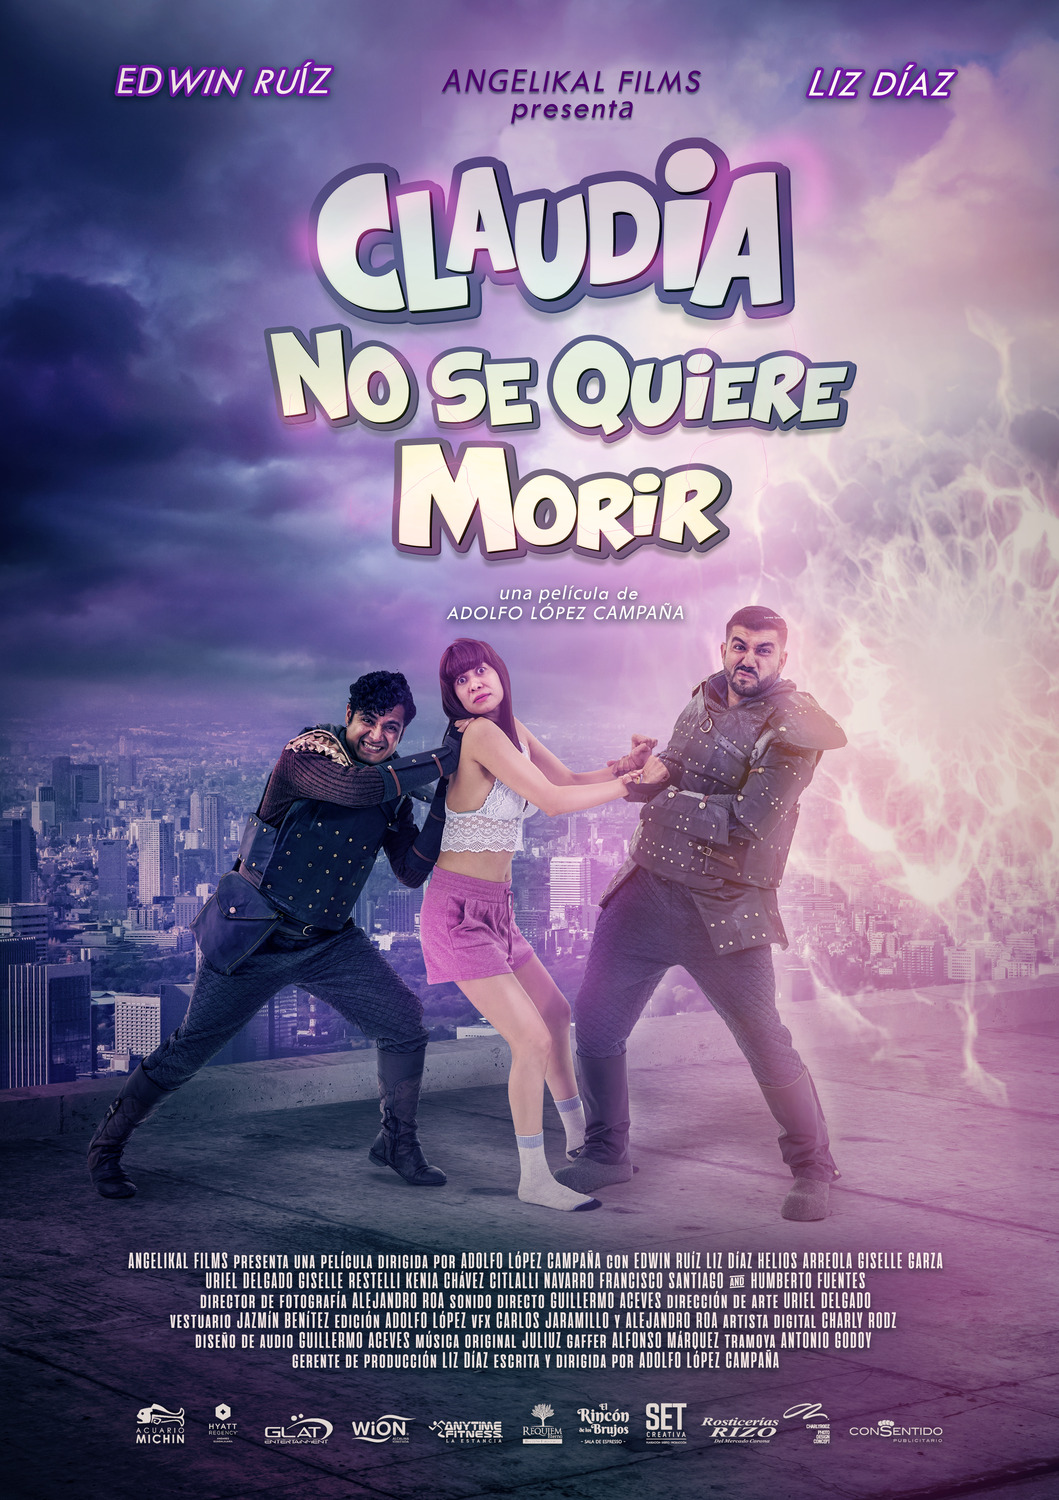 Extra Large Movie Poster Image for Claudia No Se Quiere Morir 